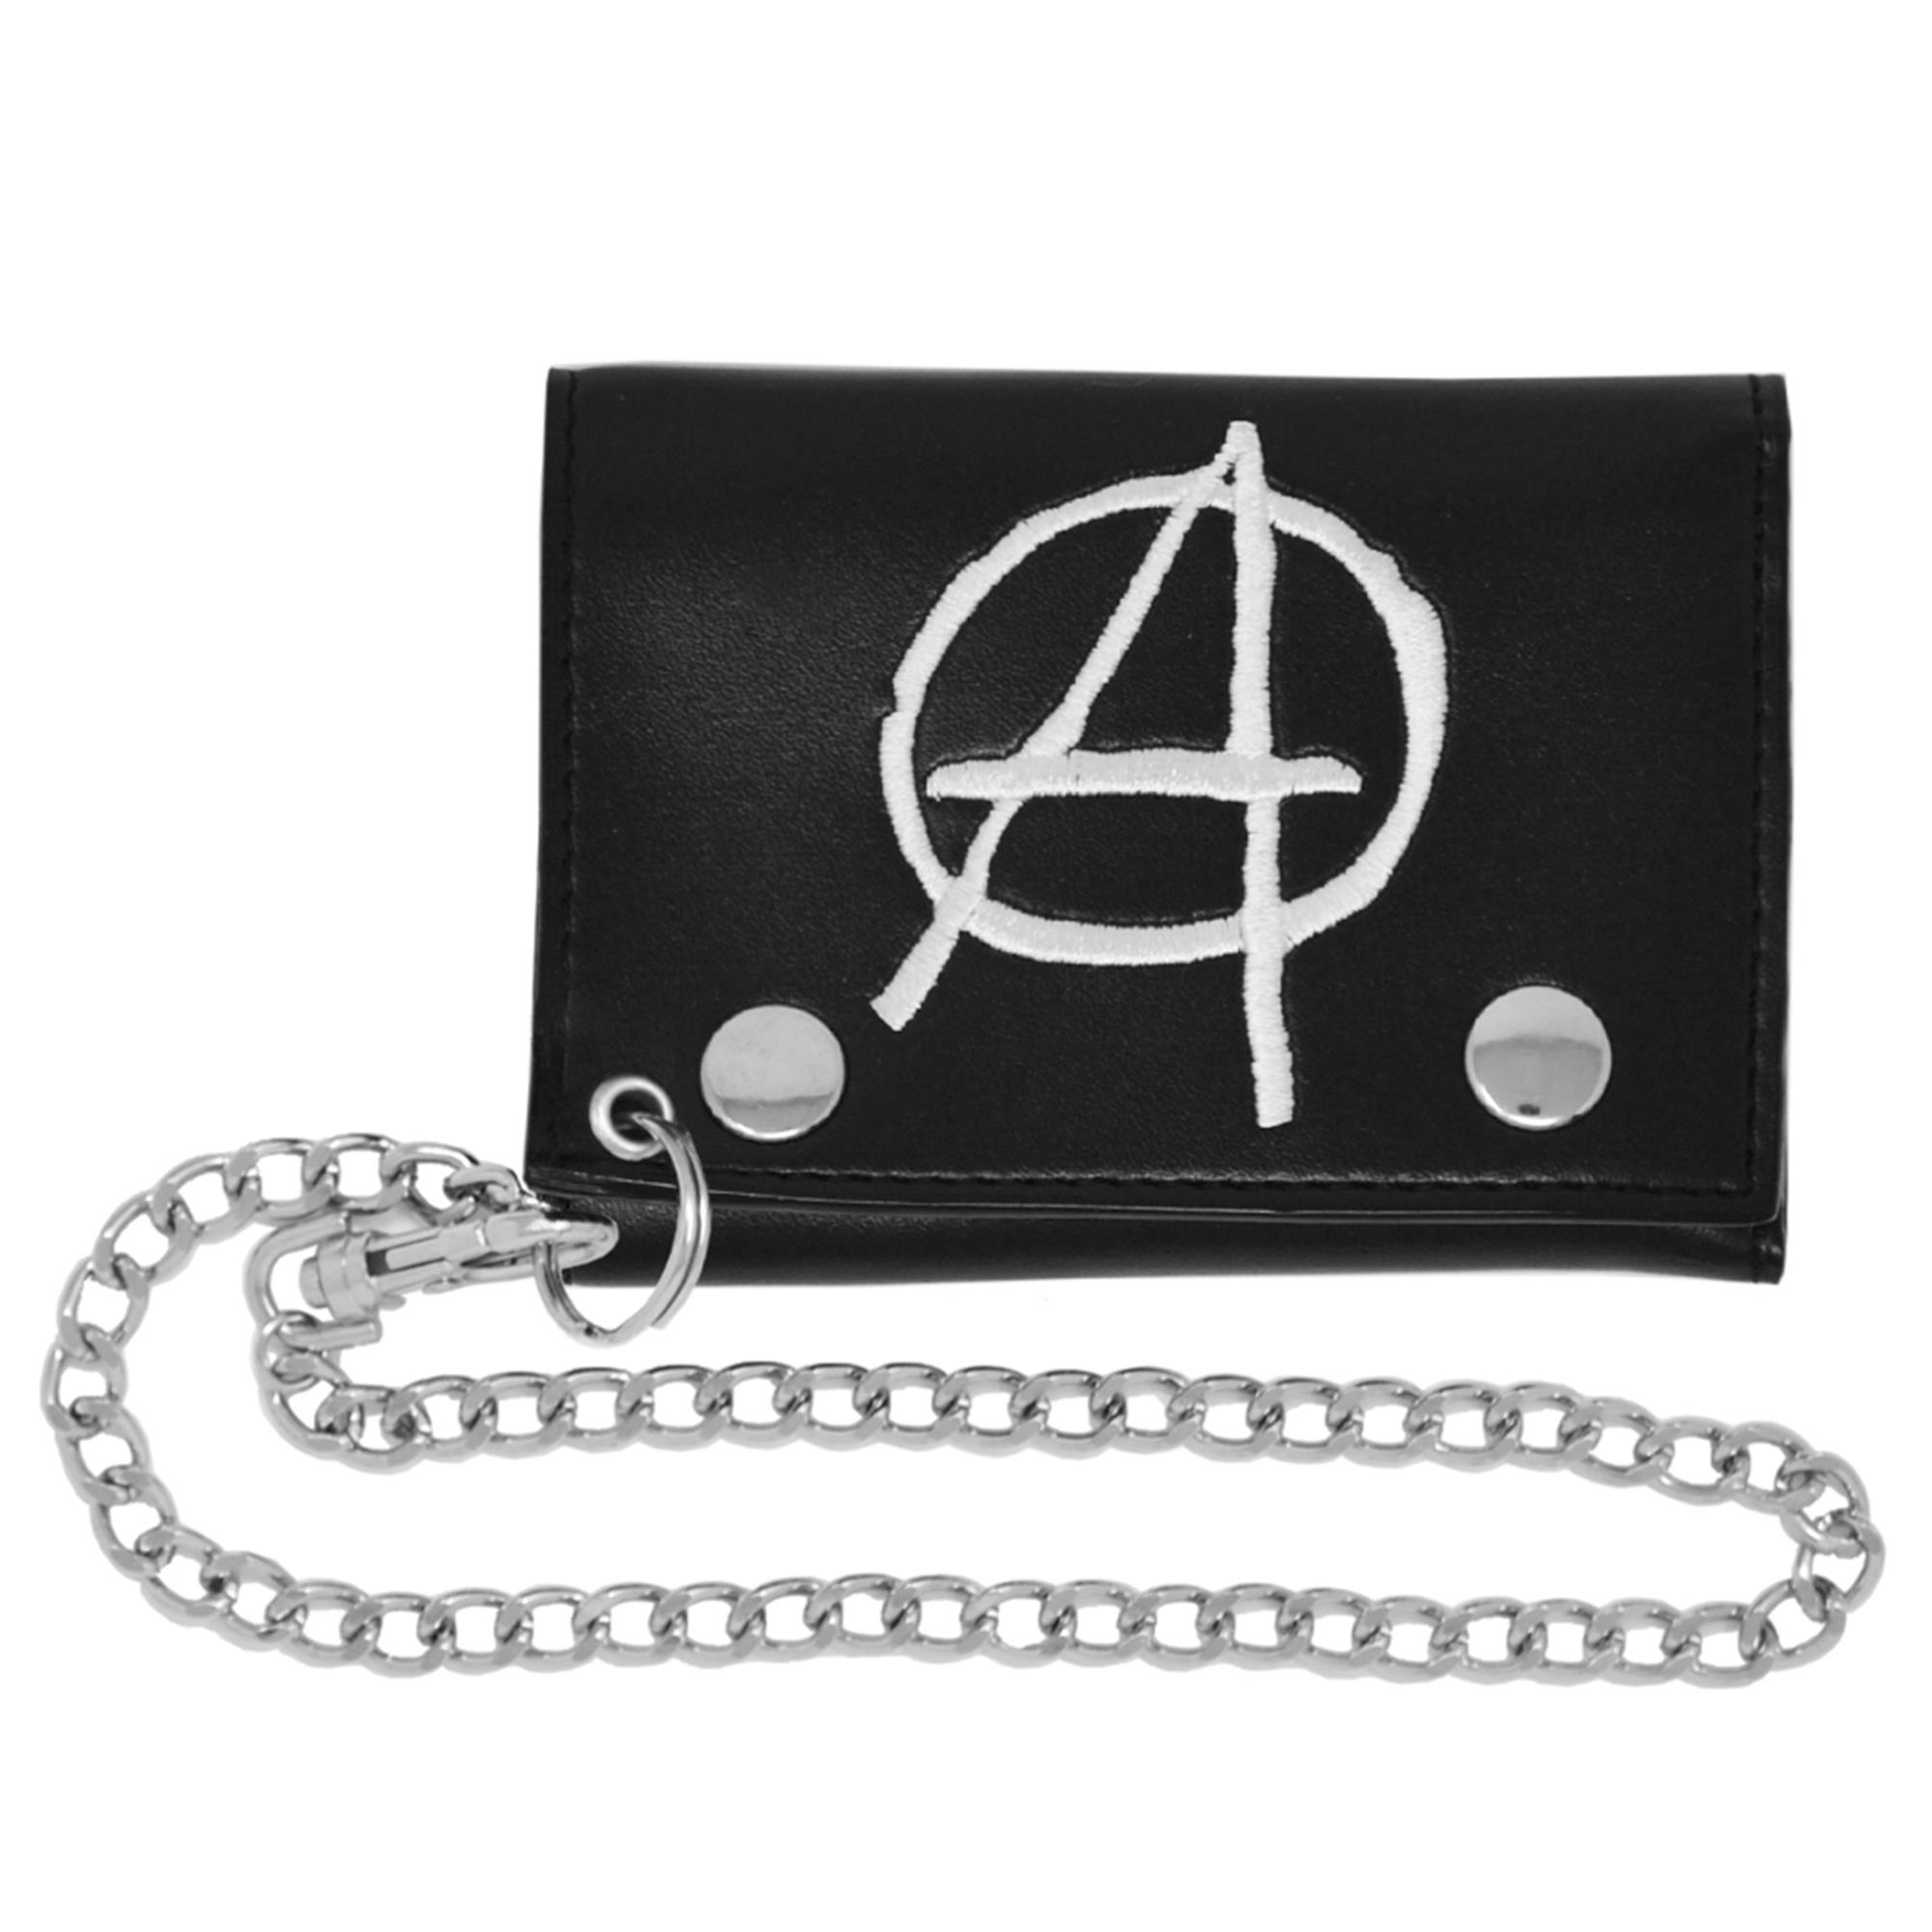 WHITE ANARCHY WALLET